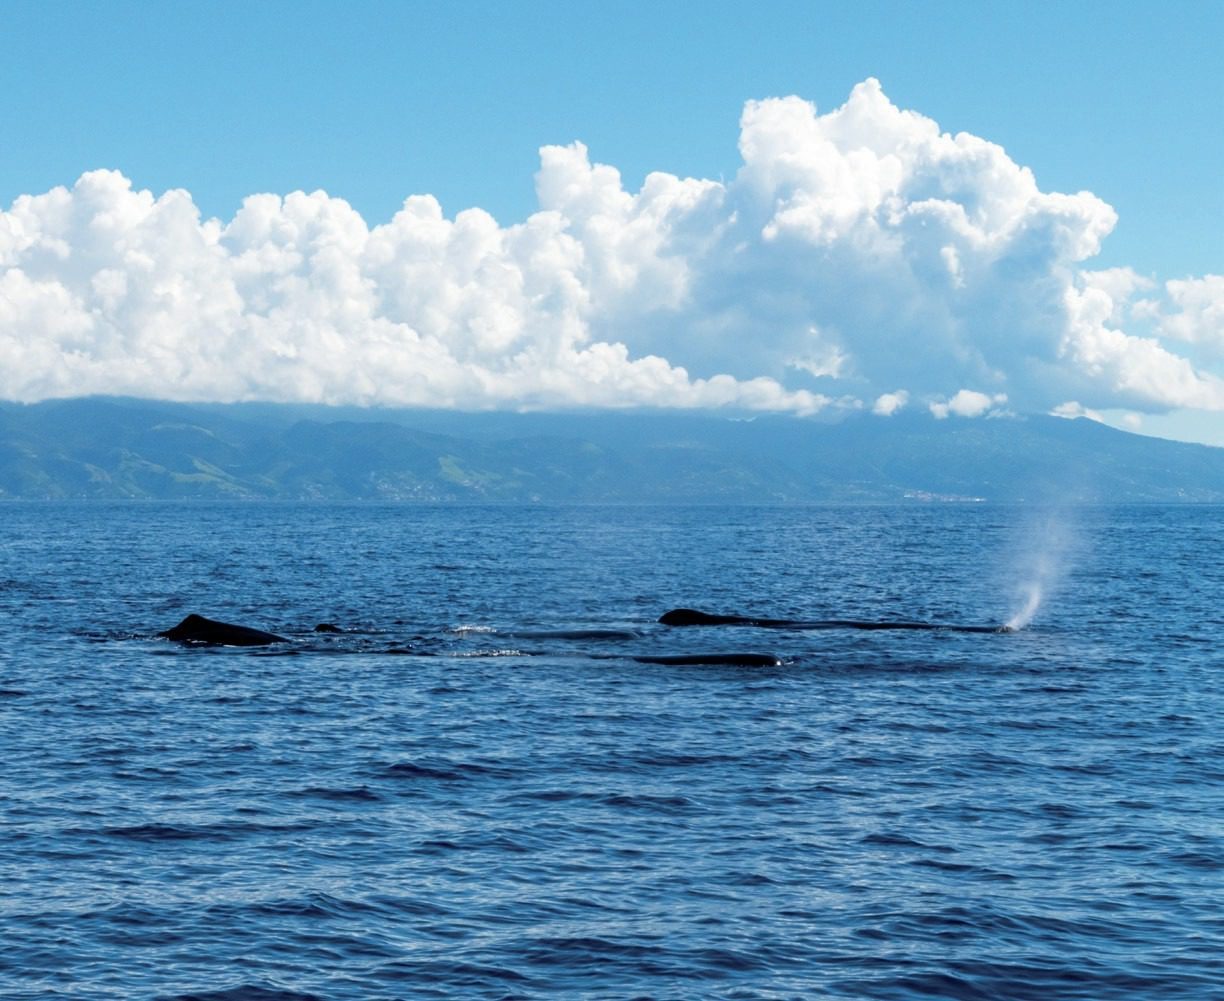 Sperm whales on the surface